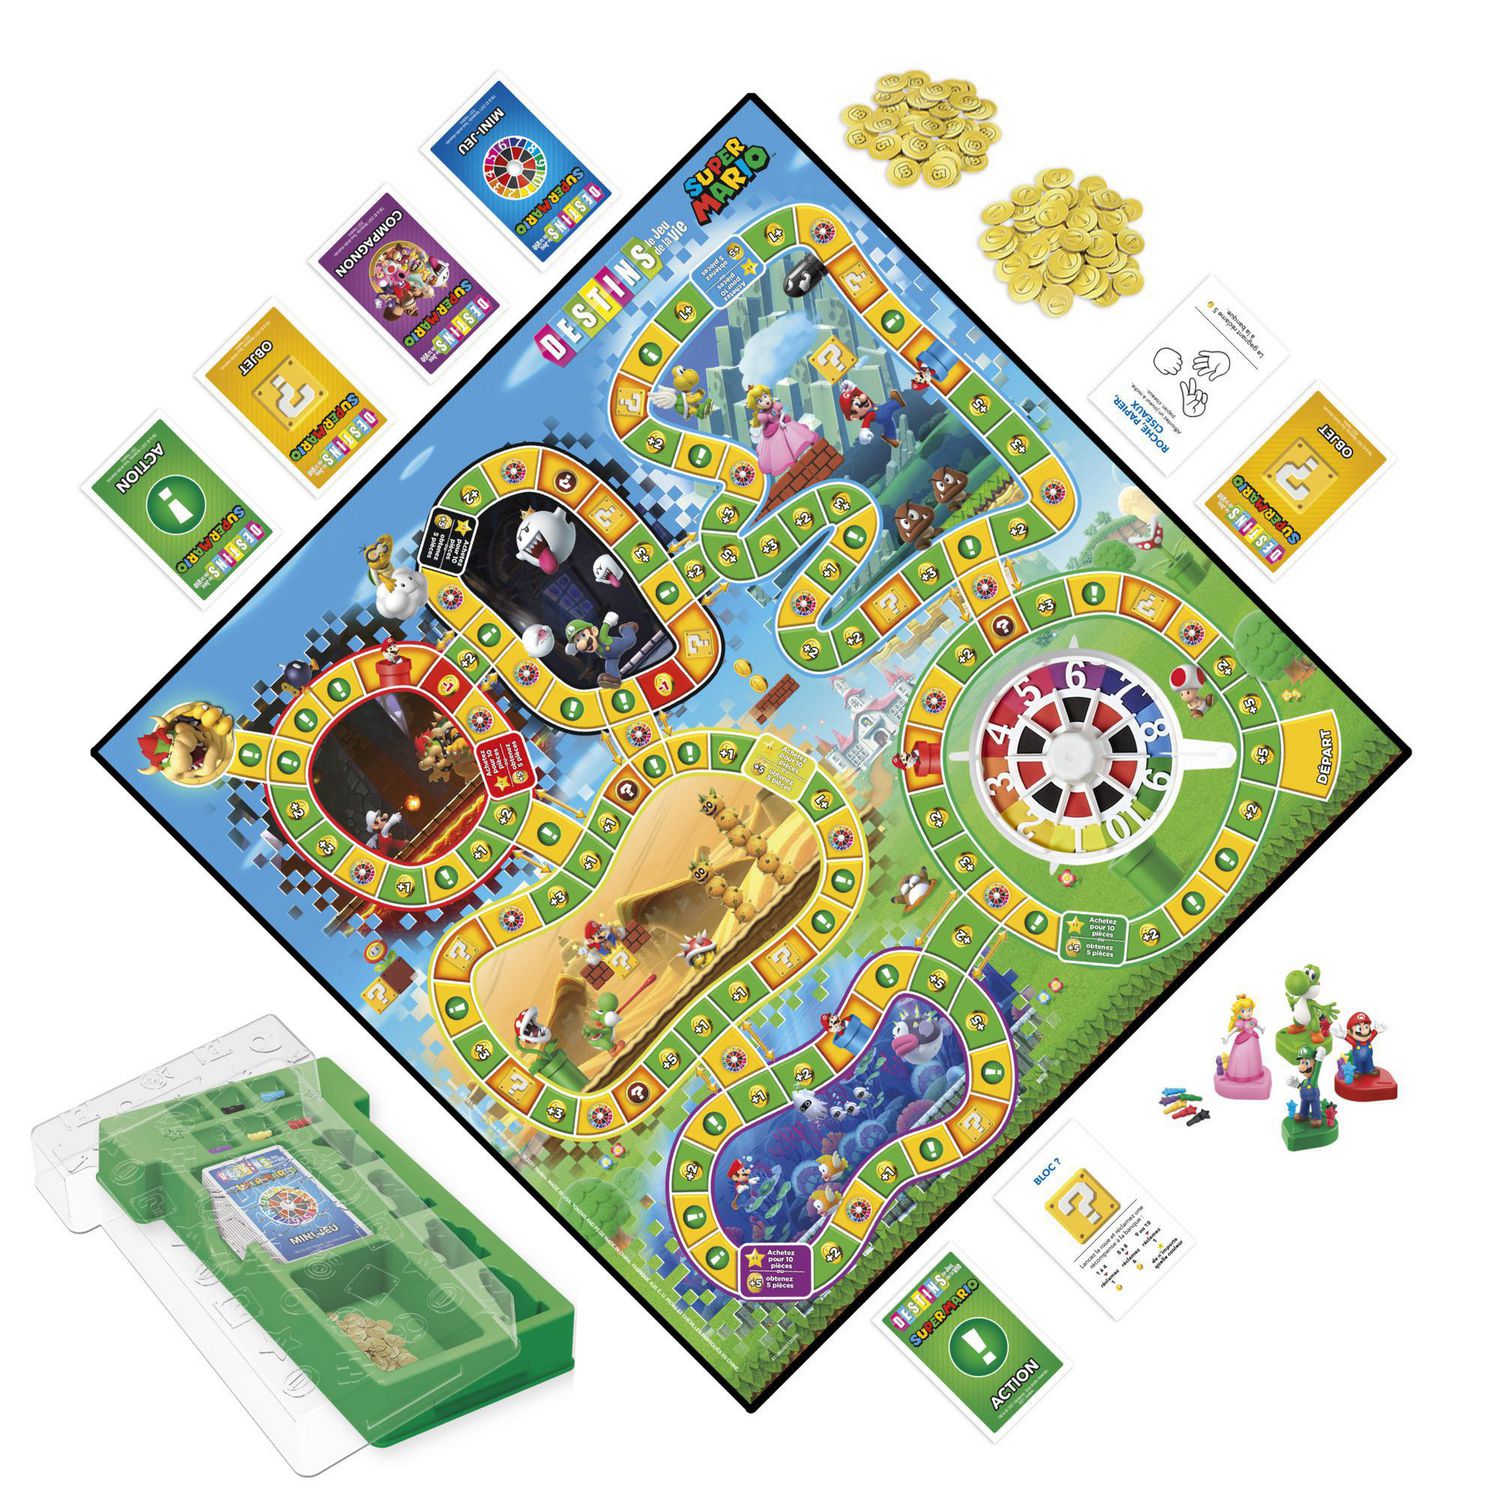 Exclusive: Game of Life: Super Mario Edition board game announced